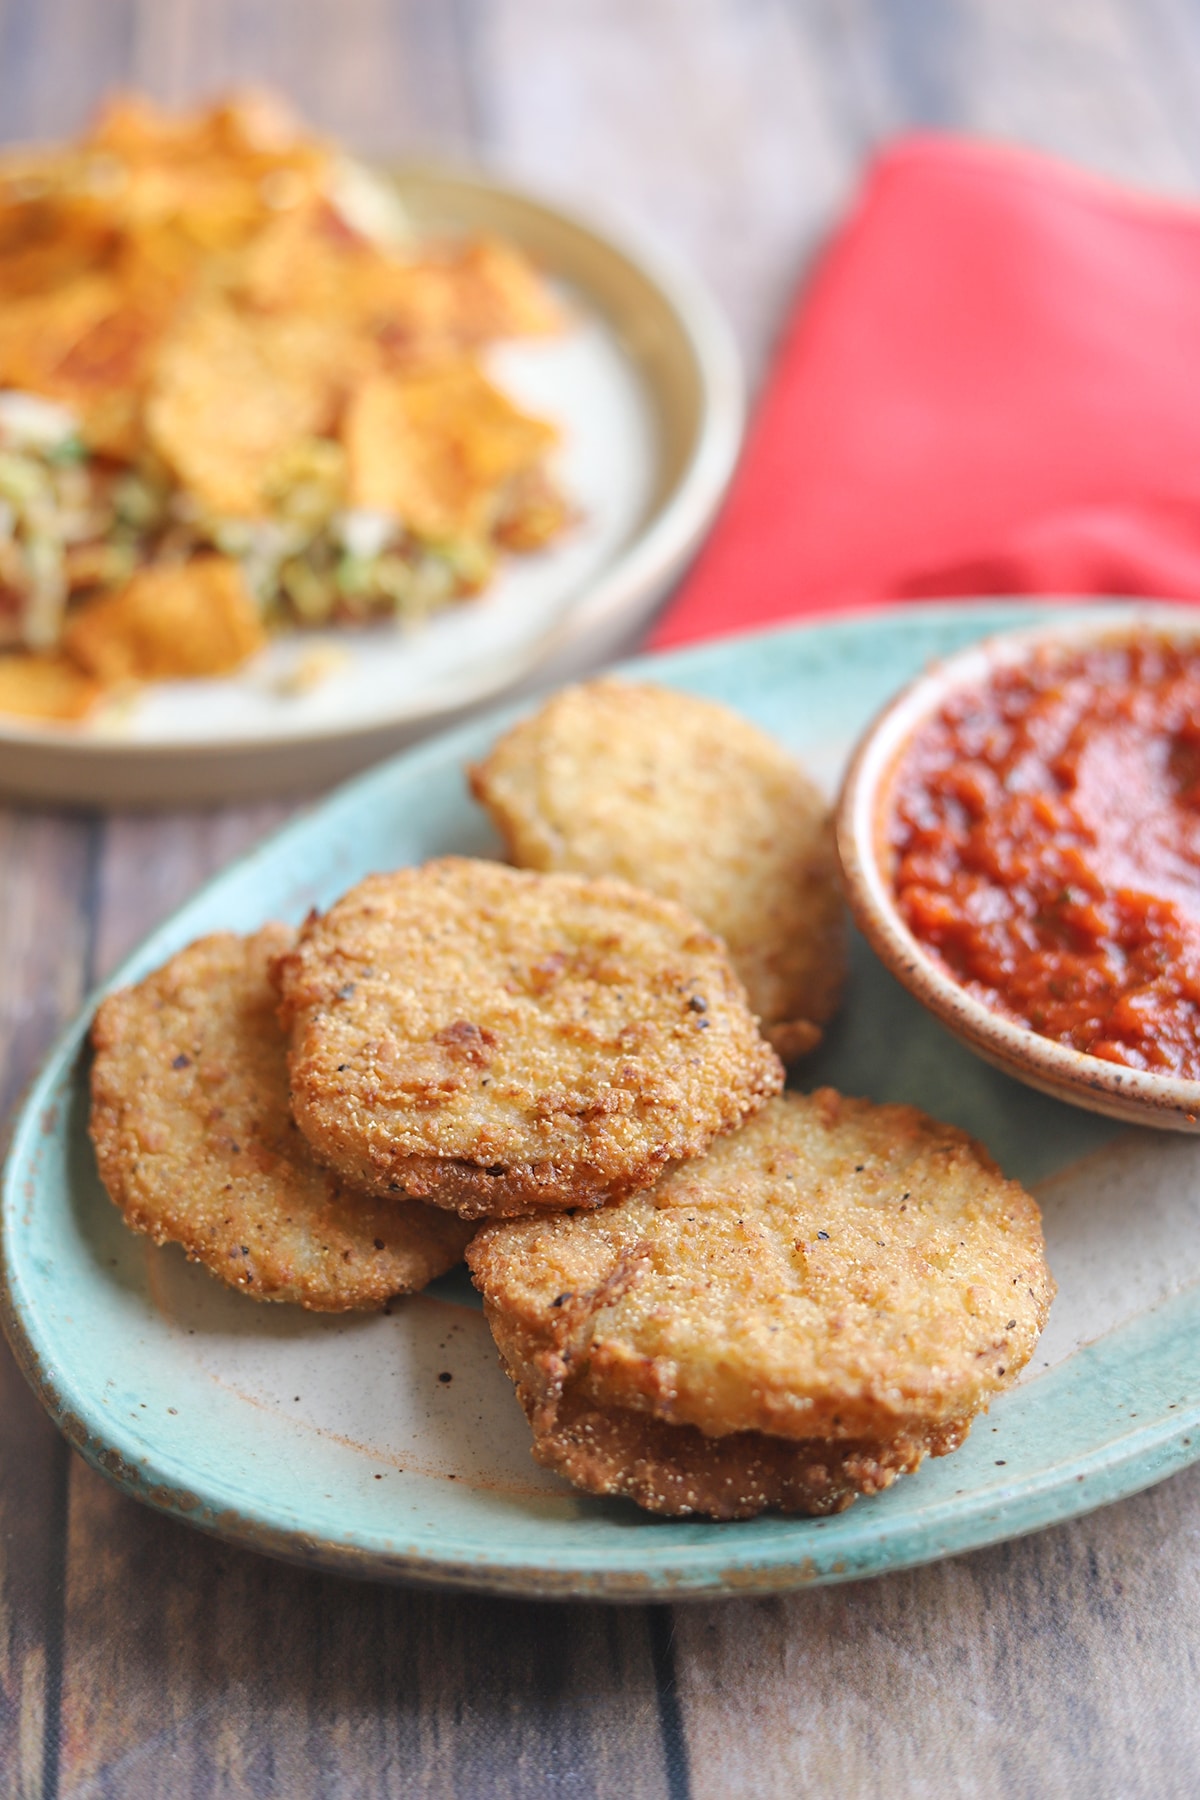 Fried green tomatoes with red sauce on platter.